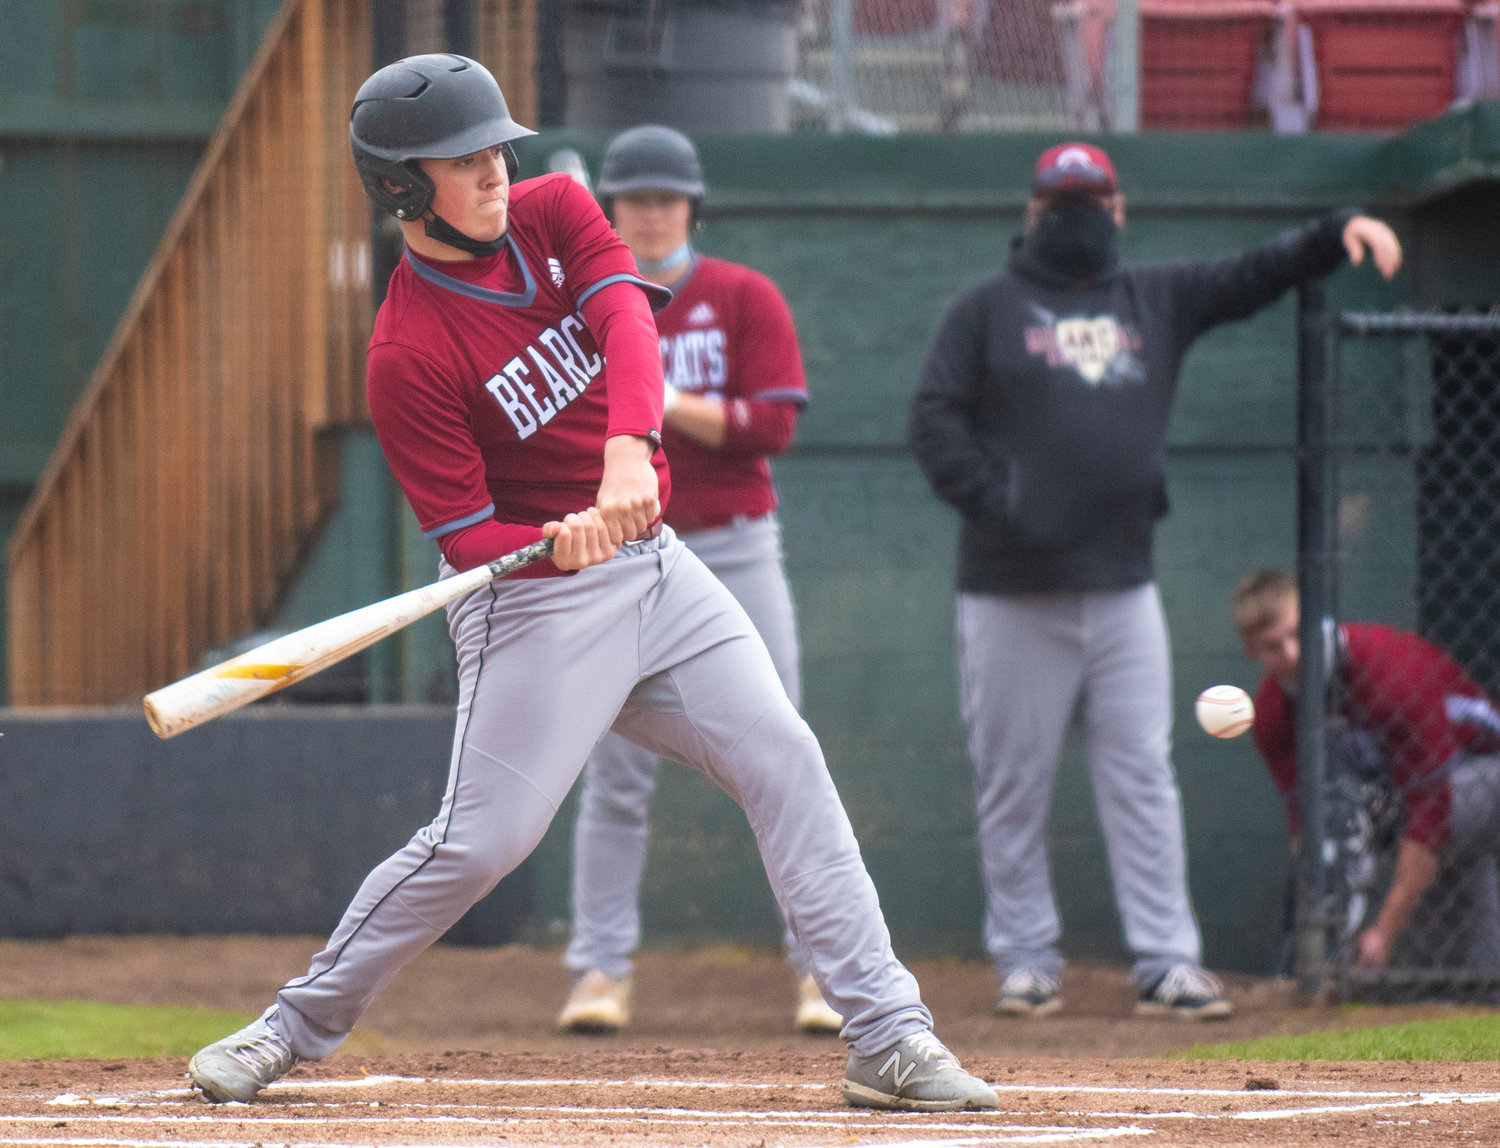 W.F. West senior Kolby Hansen loads up to swing at a pitch on Friday.